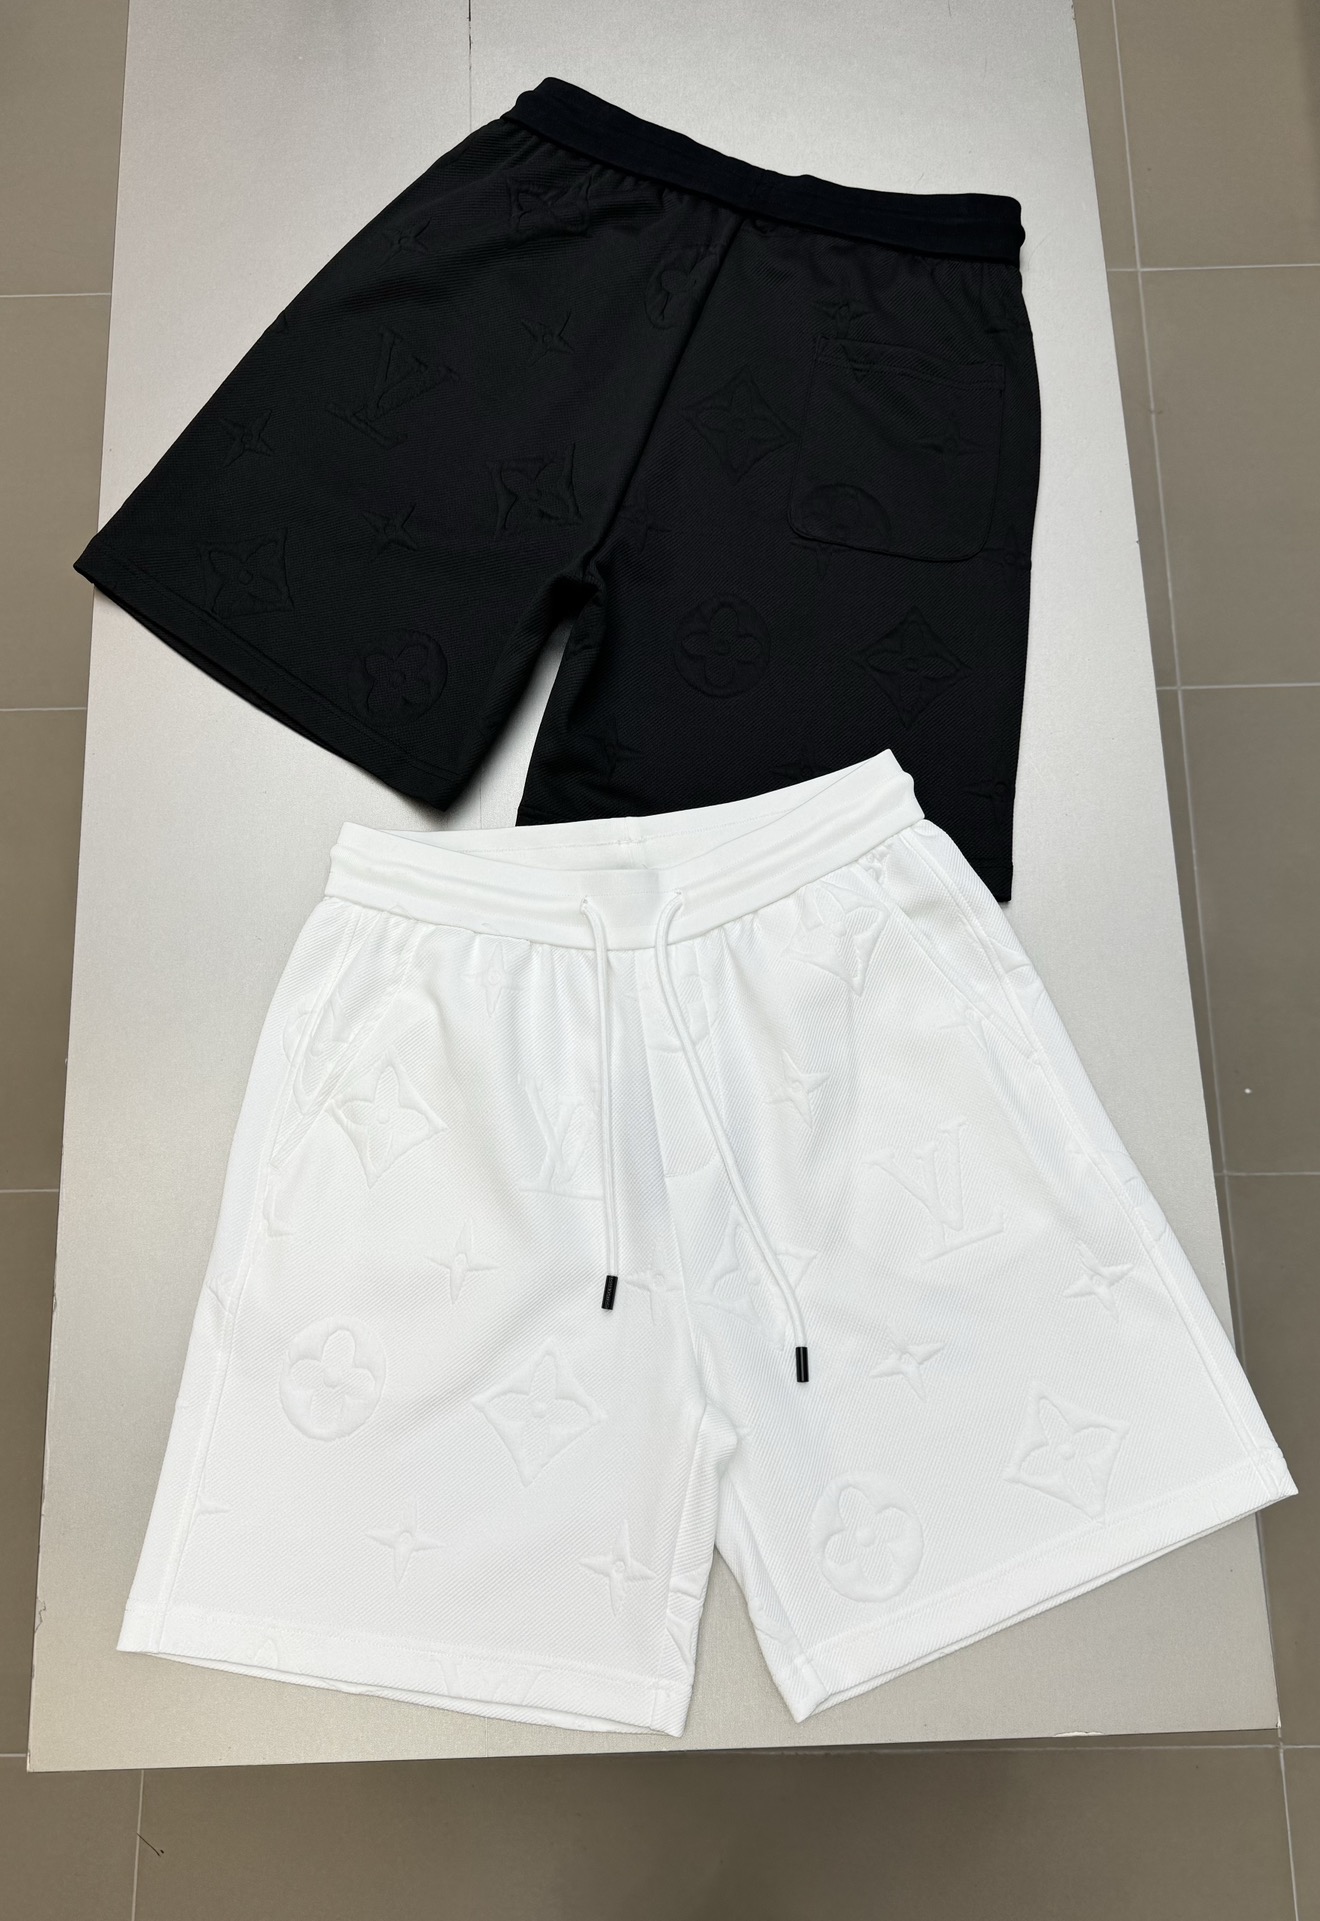 Louis Vuitton Clothing Shorts Shop Now
 Black White Unisex Cotton Knitted Knitting Summer Collection Casual